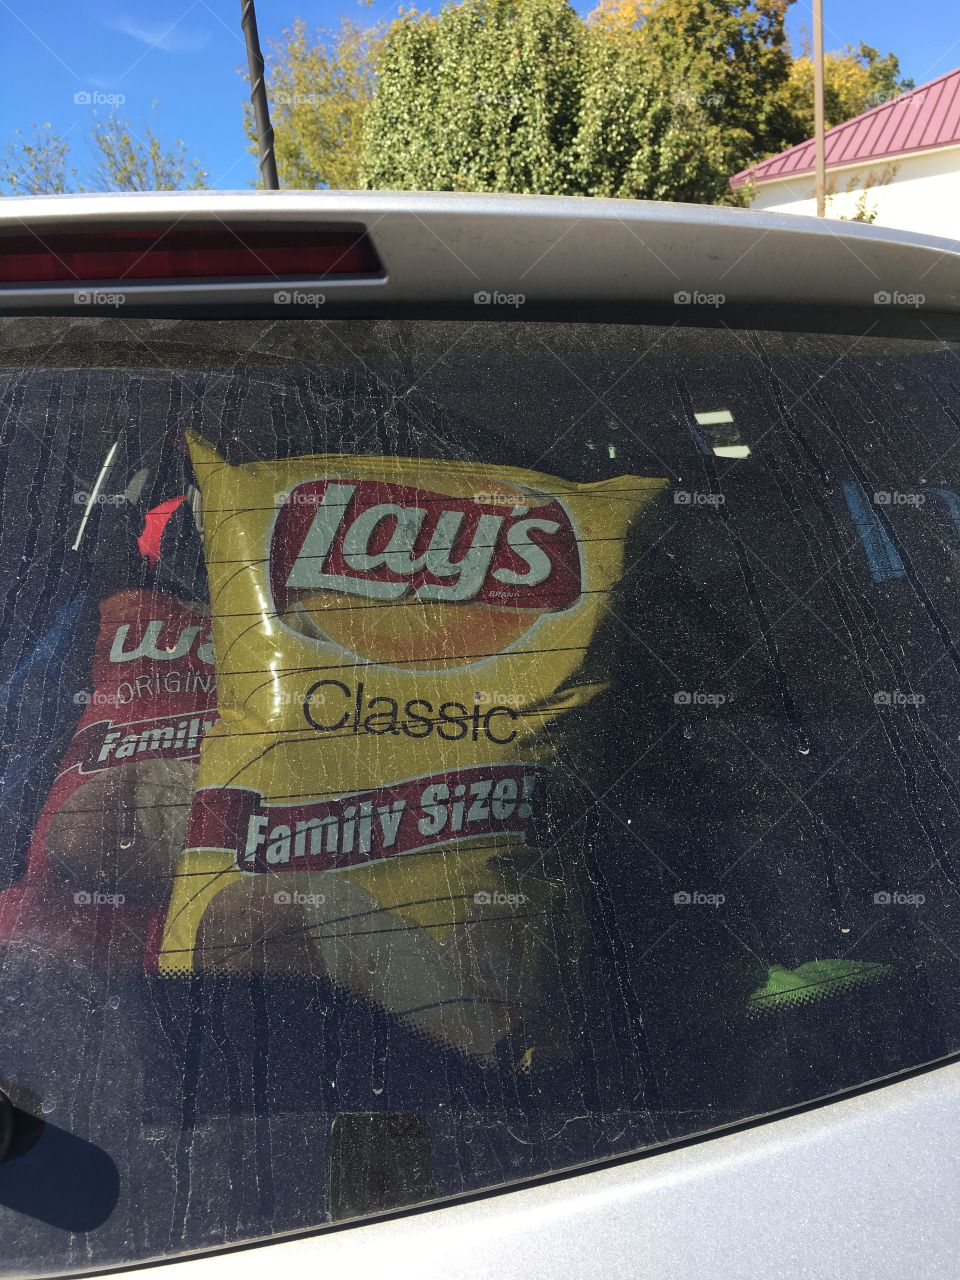 Lays chips will travel 